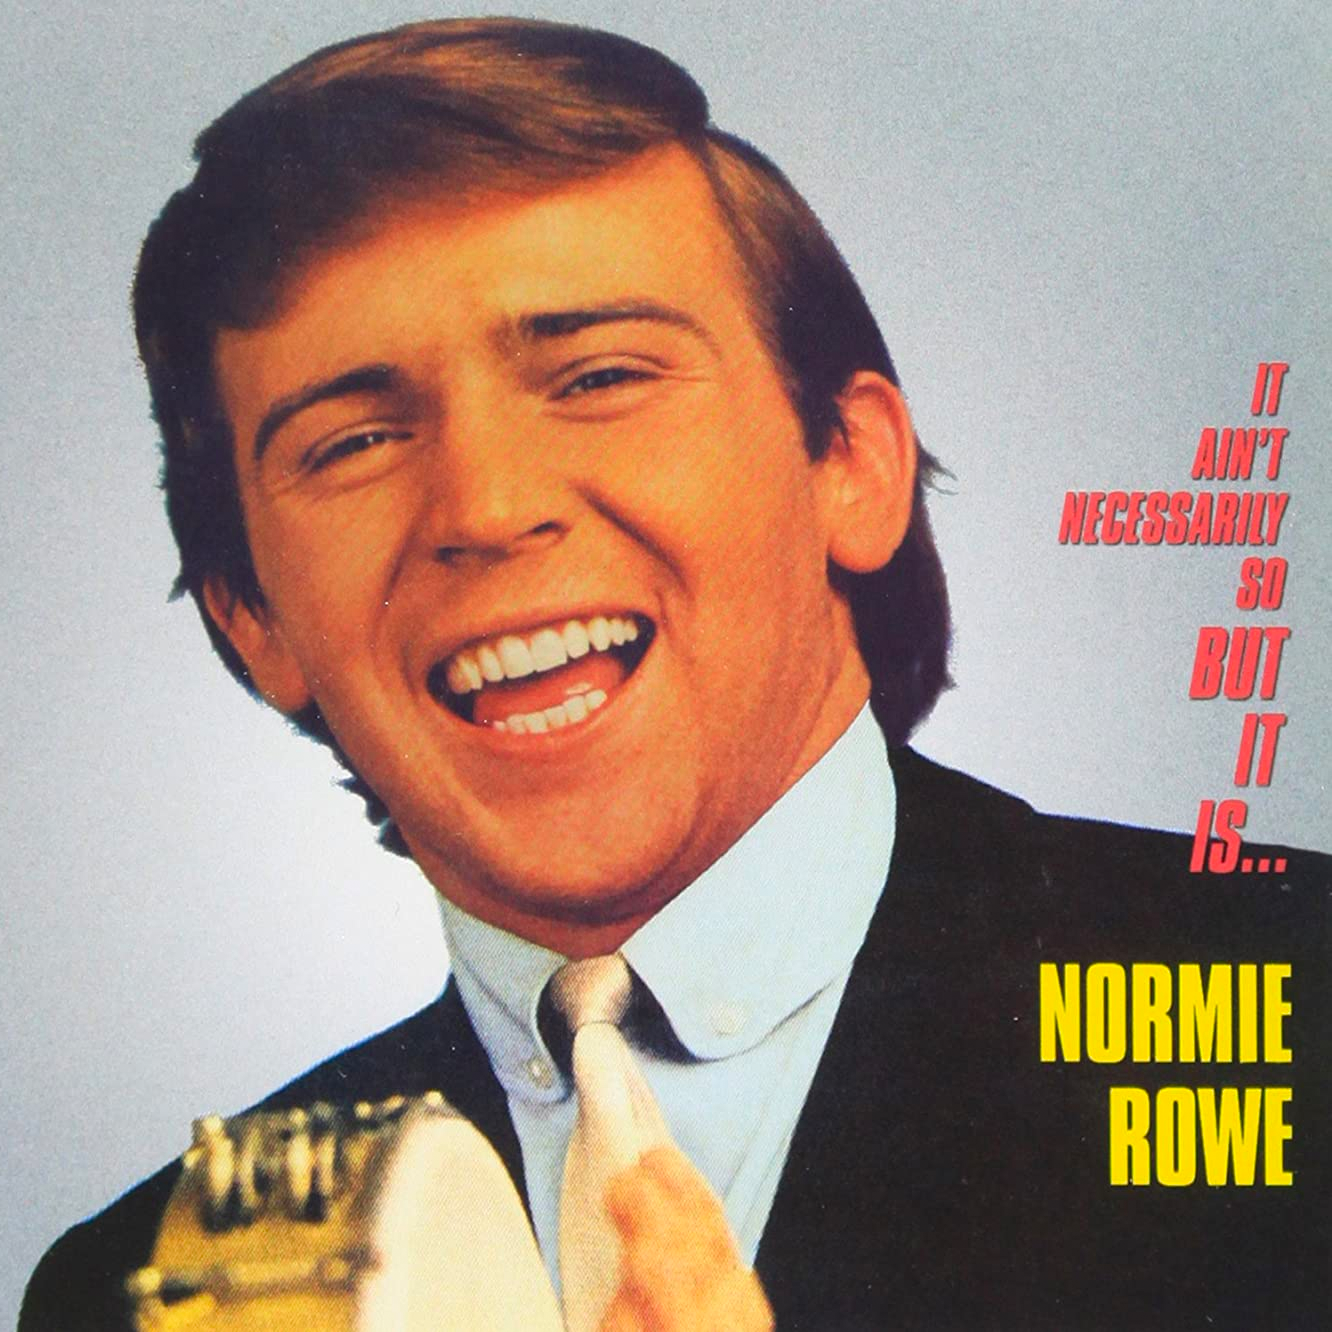 Normie Rowe & The Playboys, \'It Ain’t Necessarily So But It Is...\'